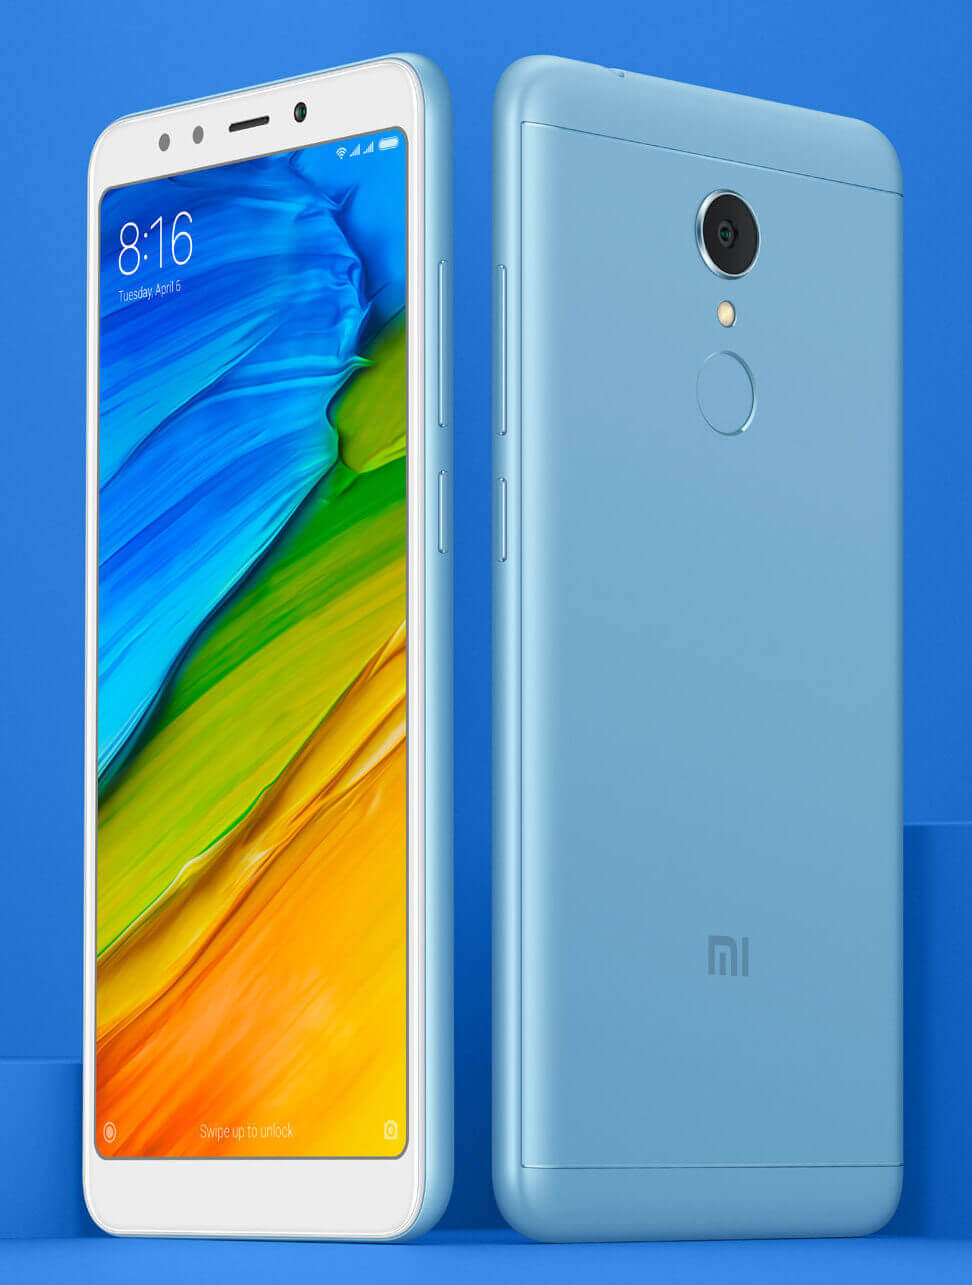 Redmi 5 : Review, Specifications and Price in India - Indian Retail Sector